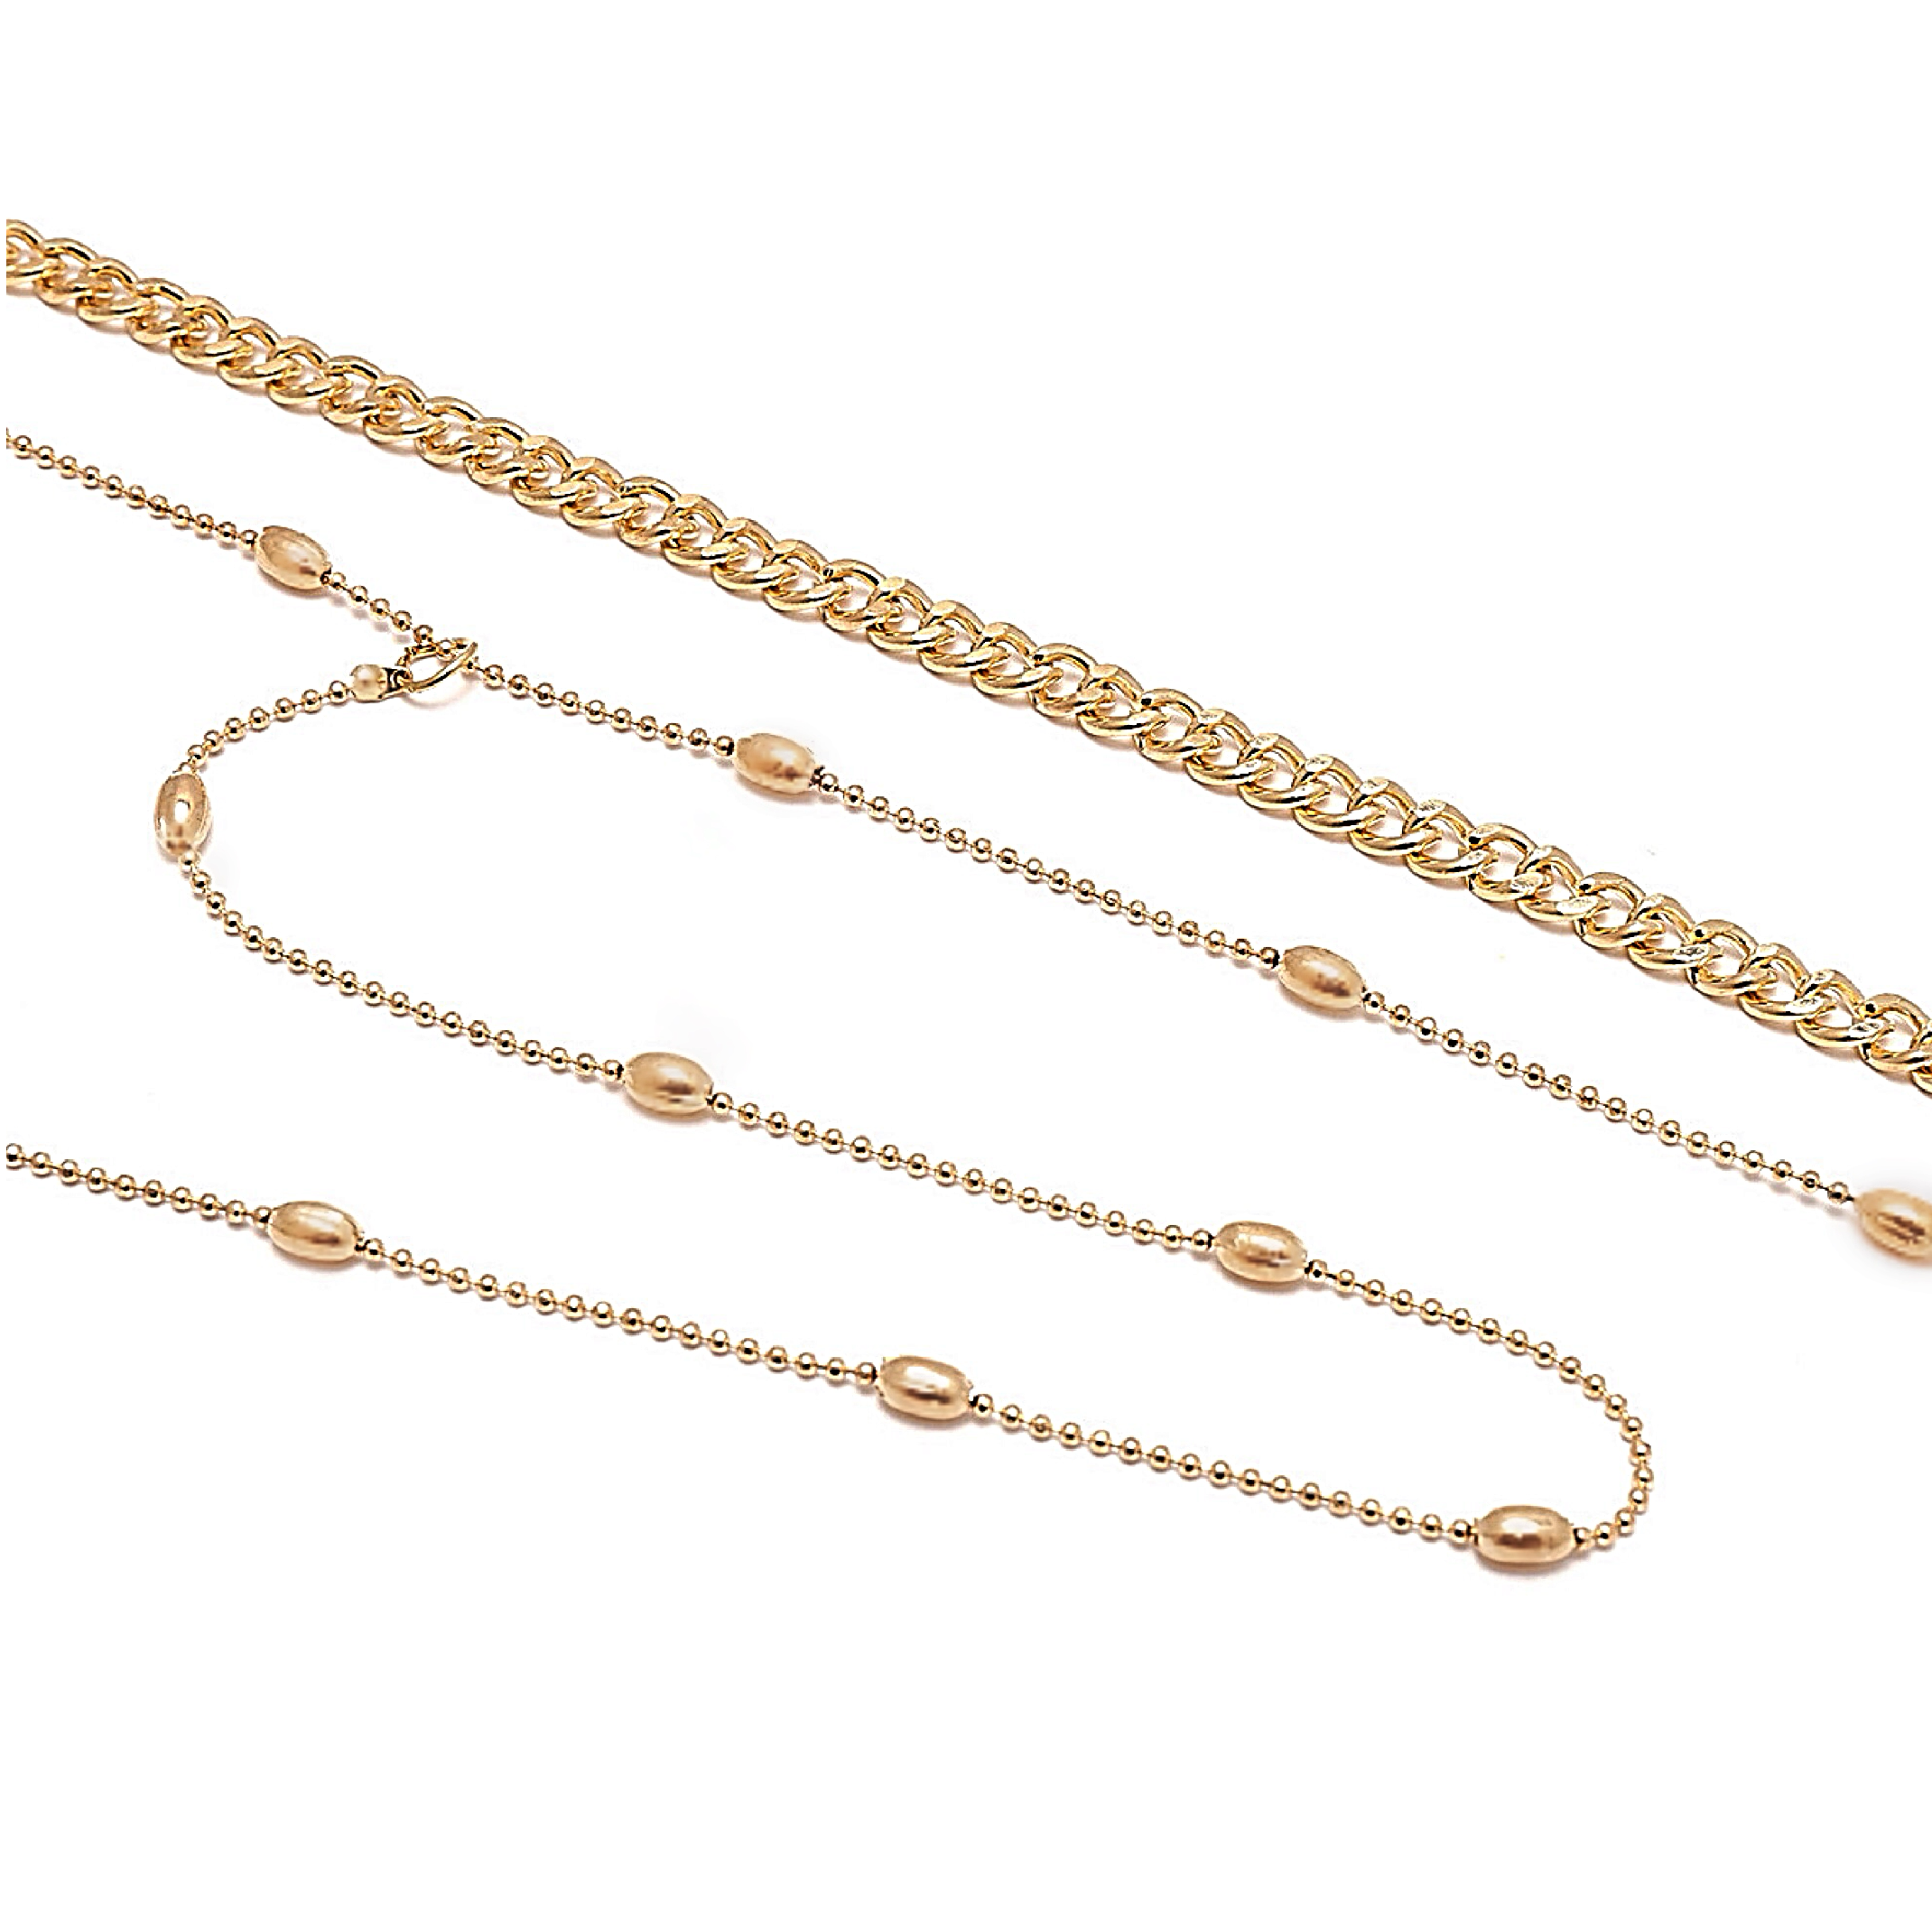 Gold bead layered chains 